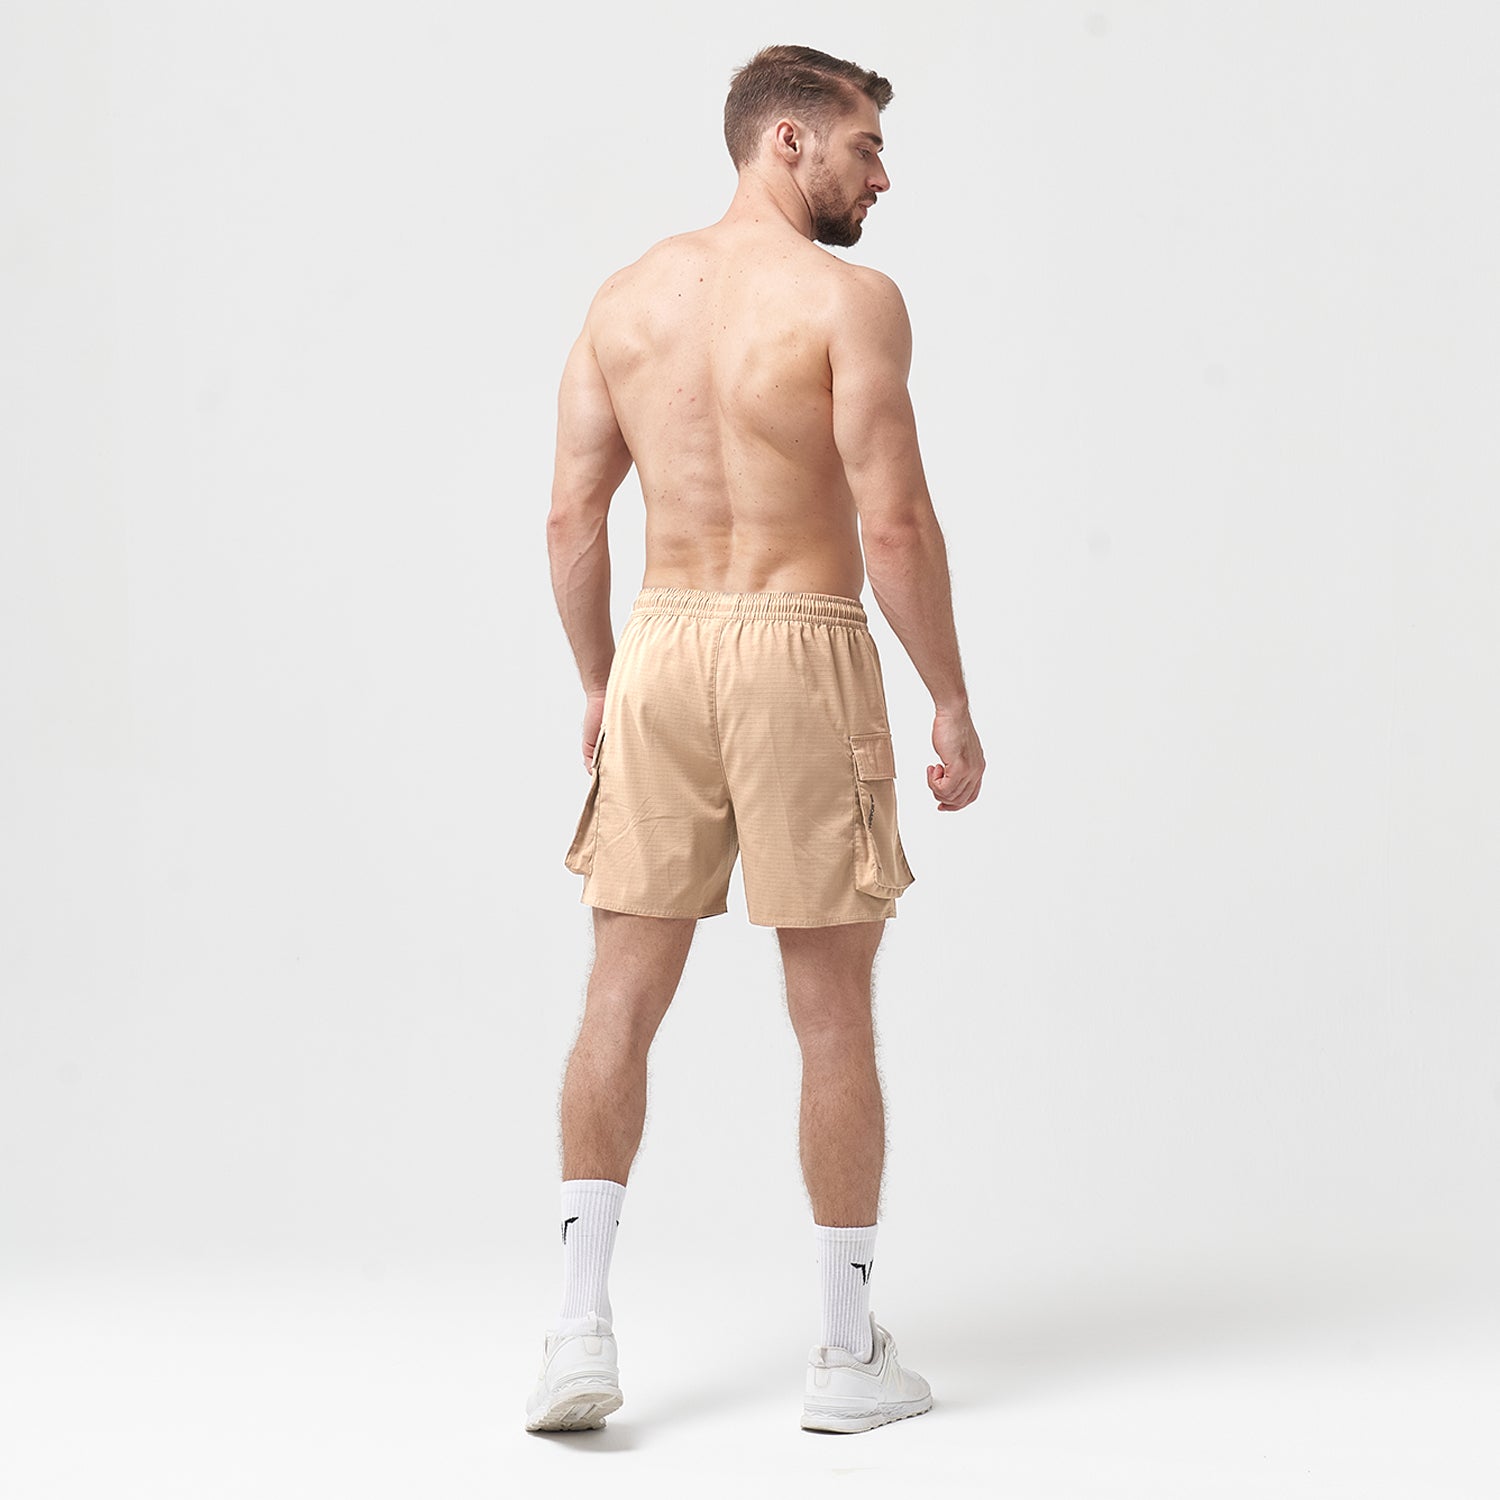 squatwolf-gym-wear-code-2-in-1-cargo-shorts-brown-workout-shorts-for-men